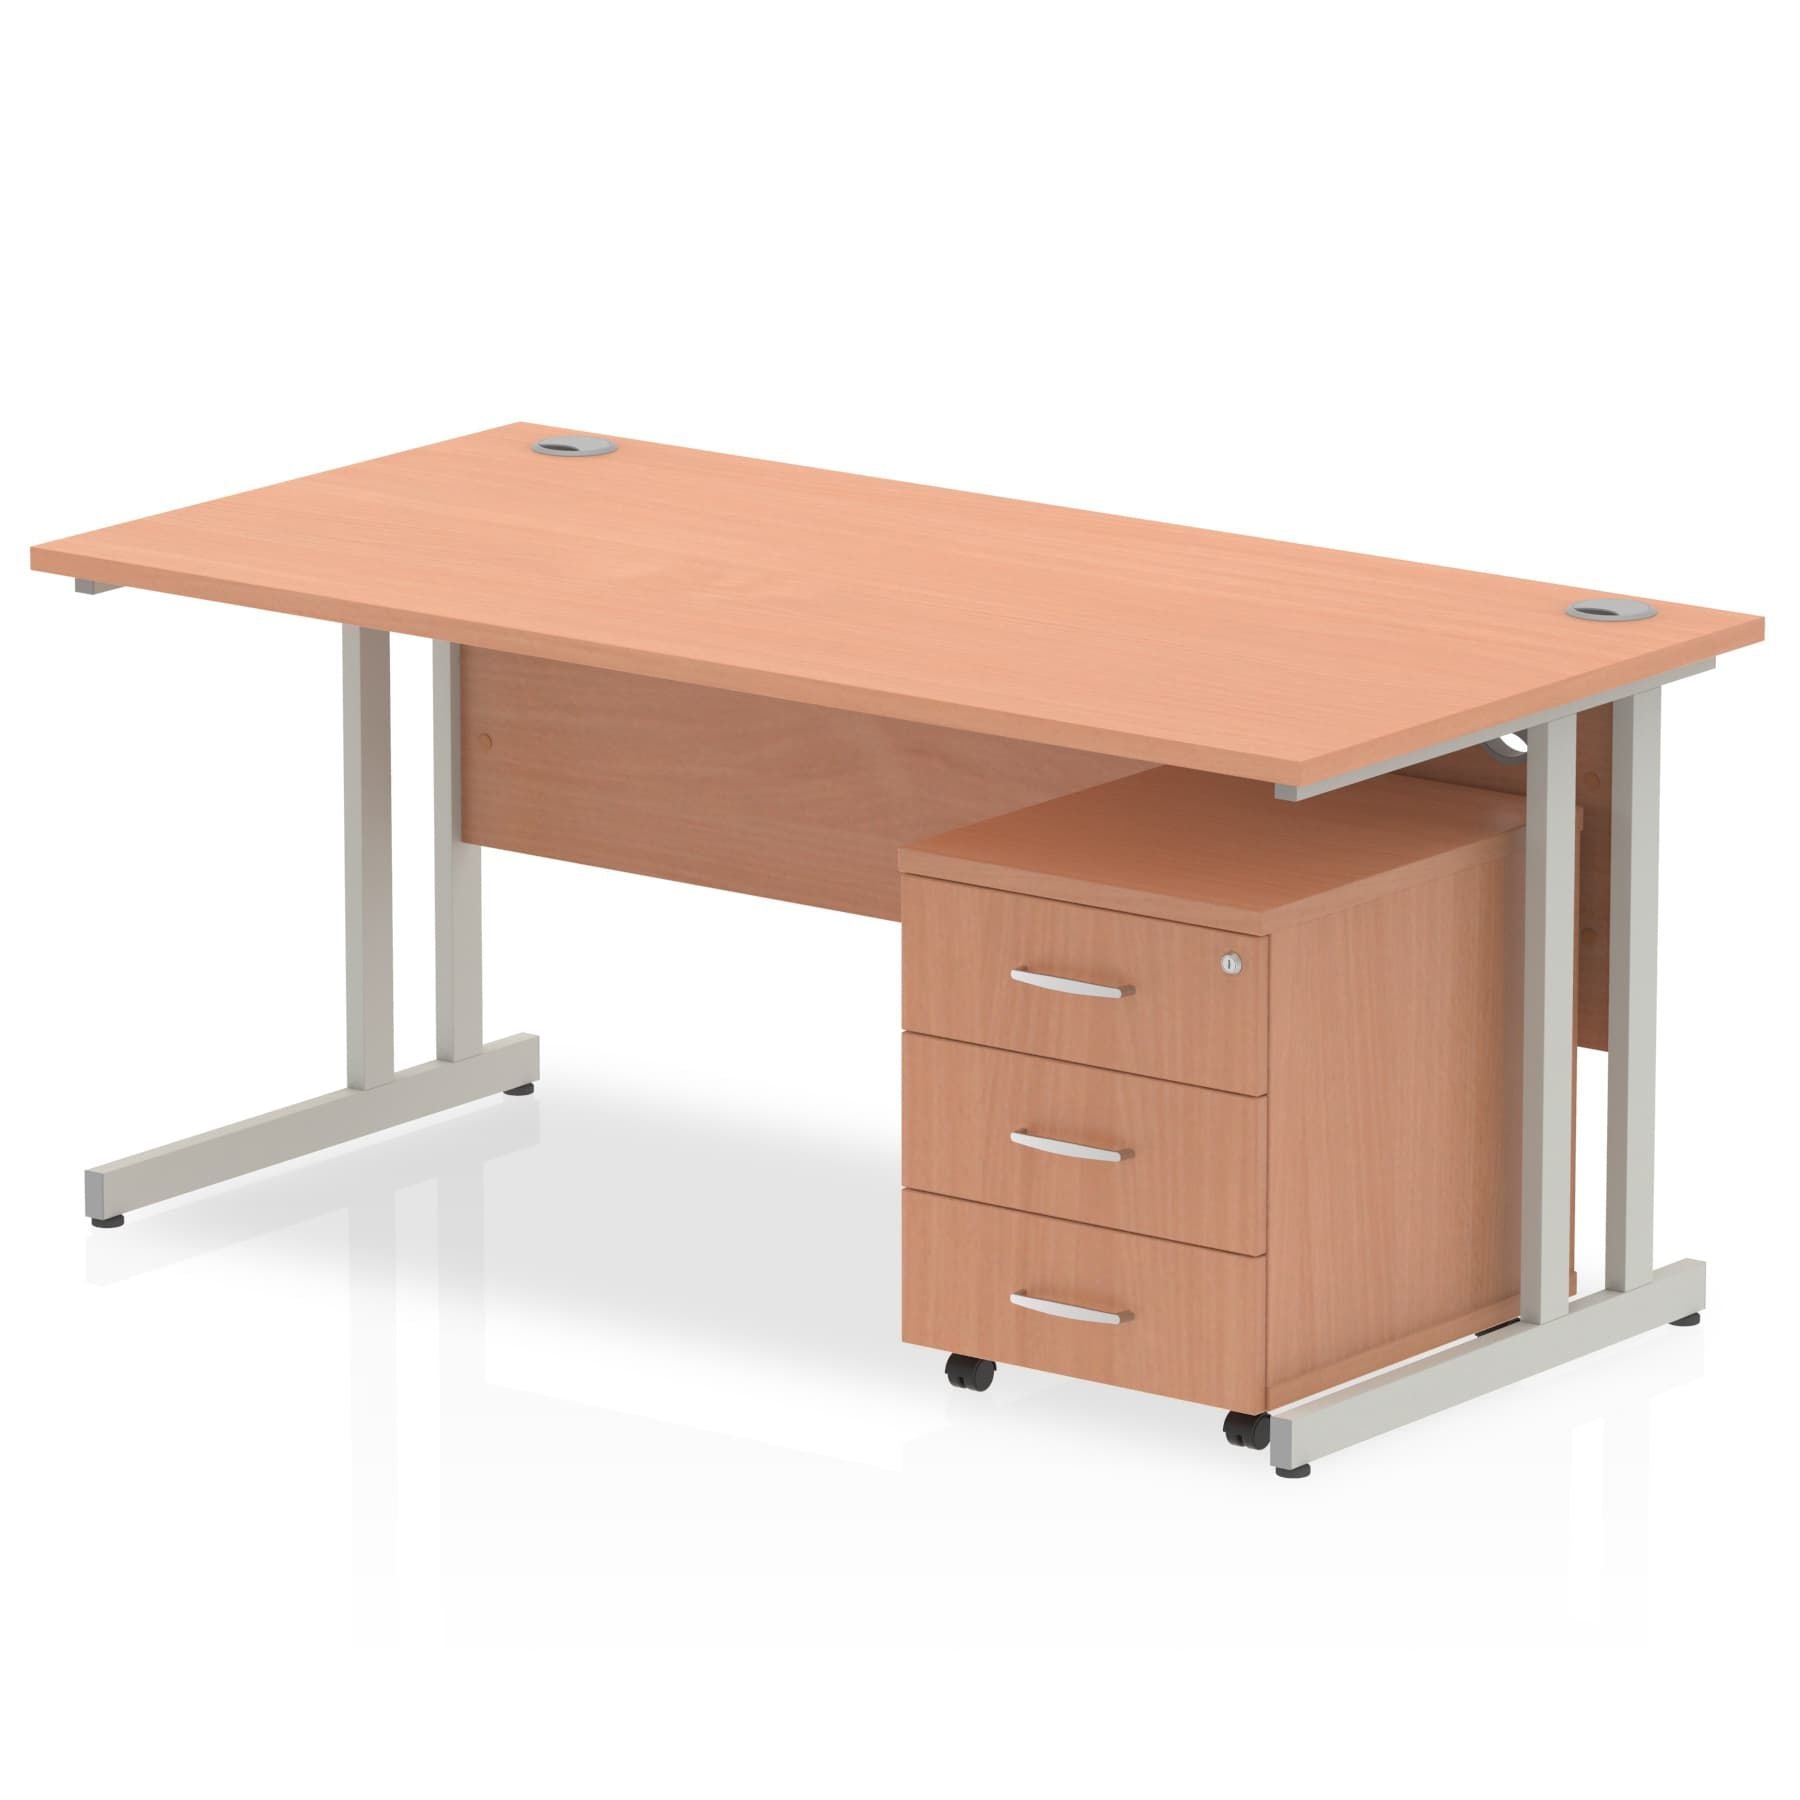 Impulse 1600mm Cantilever Straight Desk w/ Mobile Pedestal - MFC Rectangular, Self-Assembly, 5-Year Guarantee, Silver/White Frame, Lockable Drawers